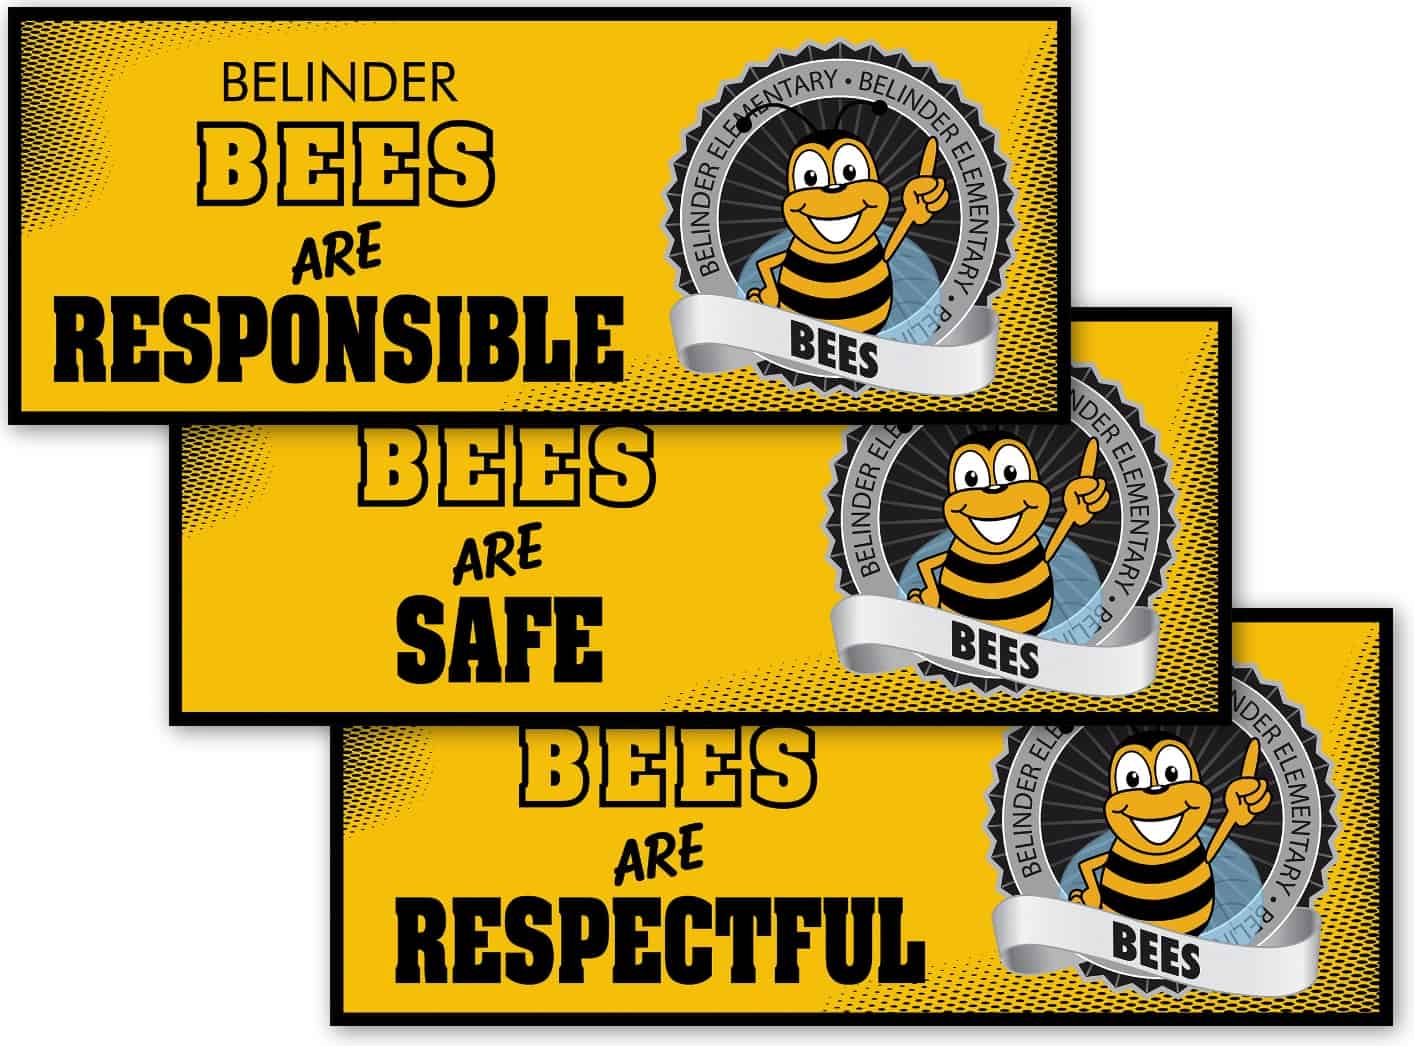 ceiling-signs-bee1